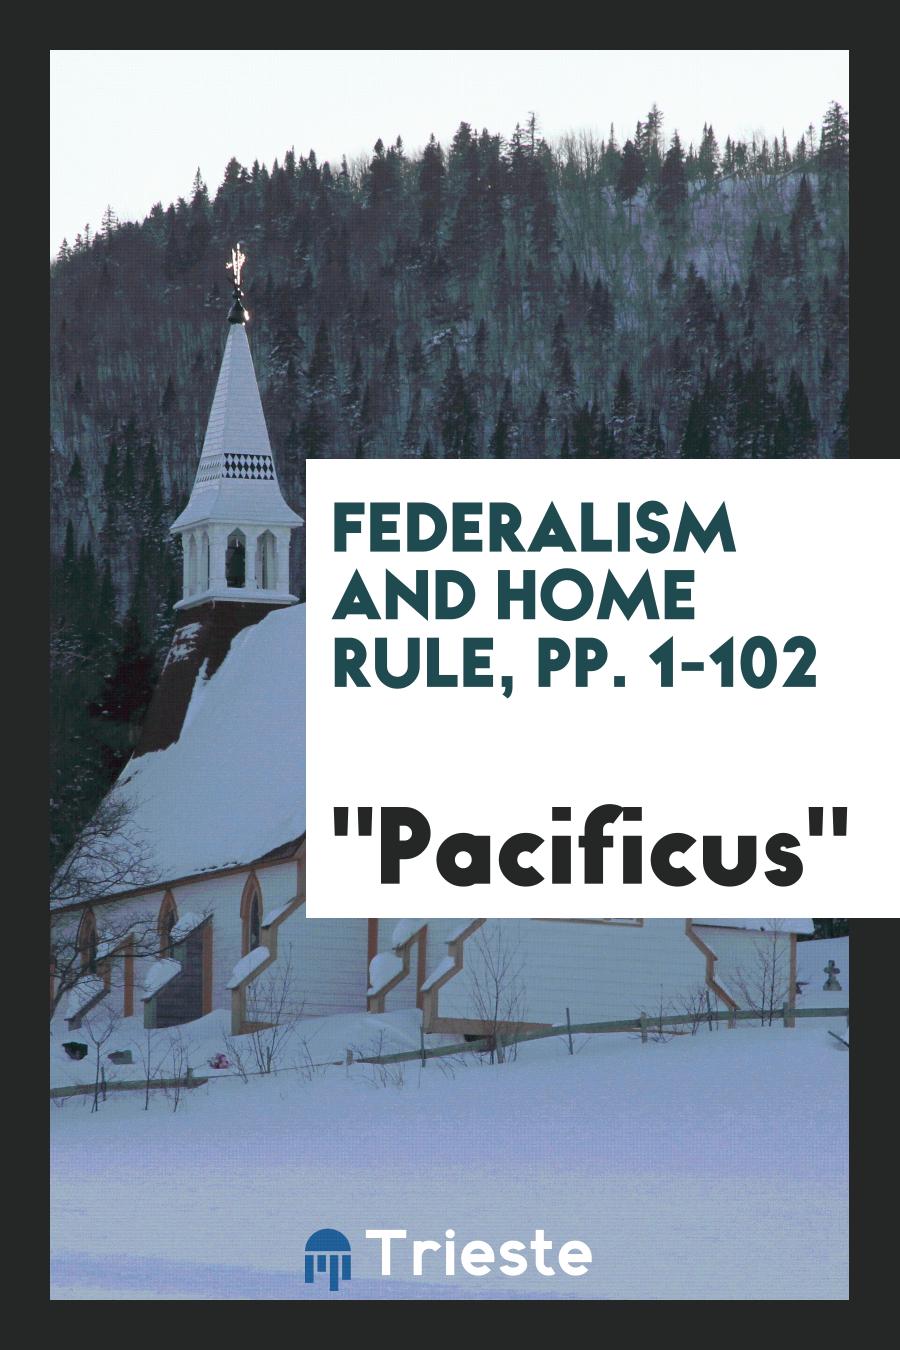 Federalism and Home Rule, pp. 1-102